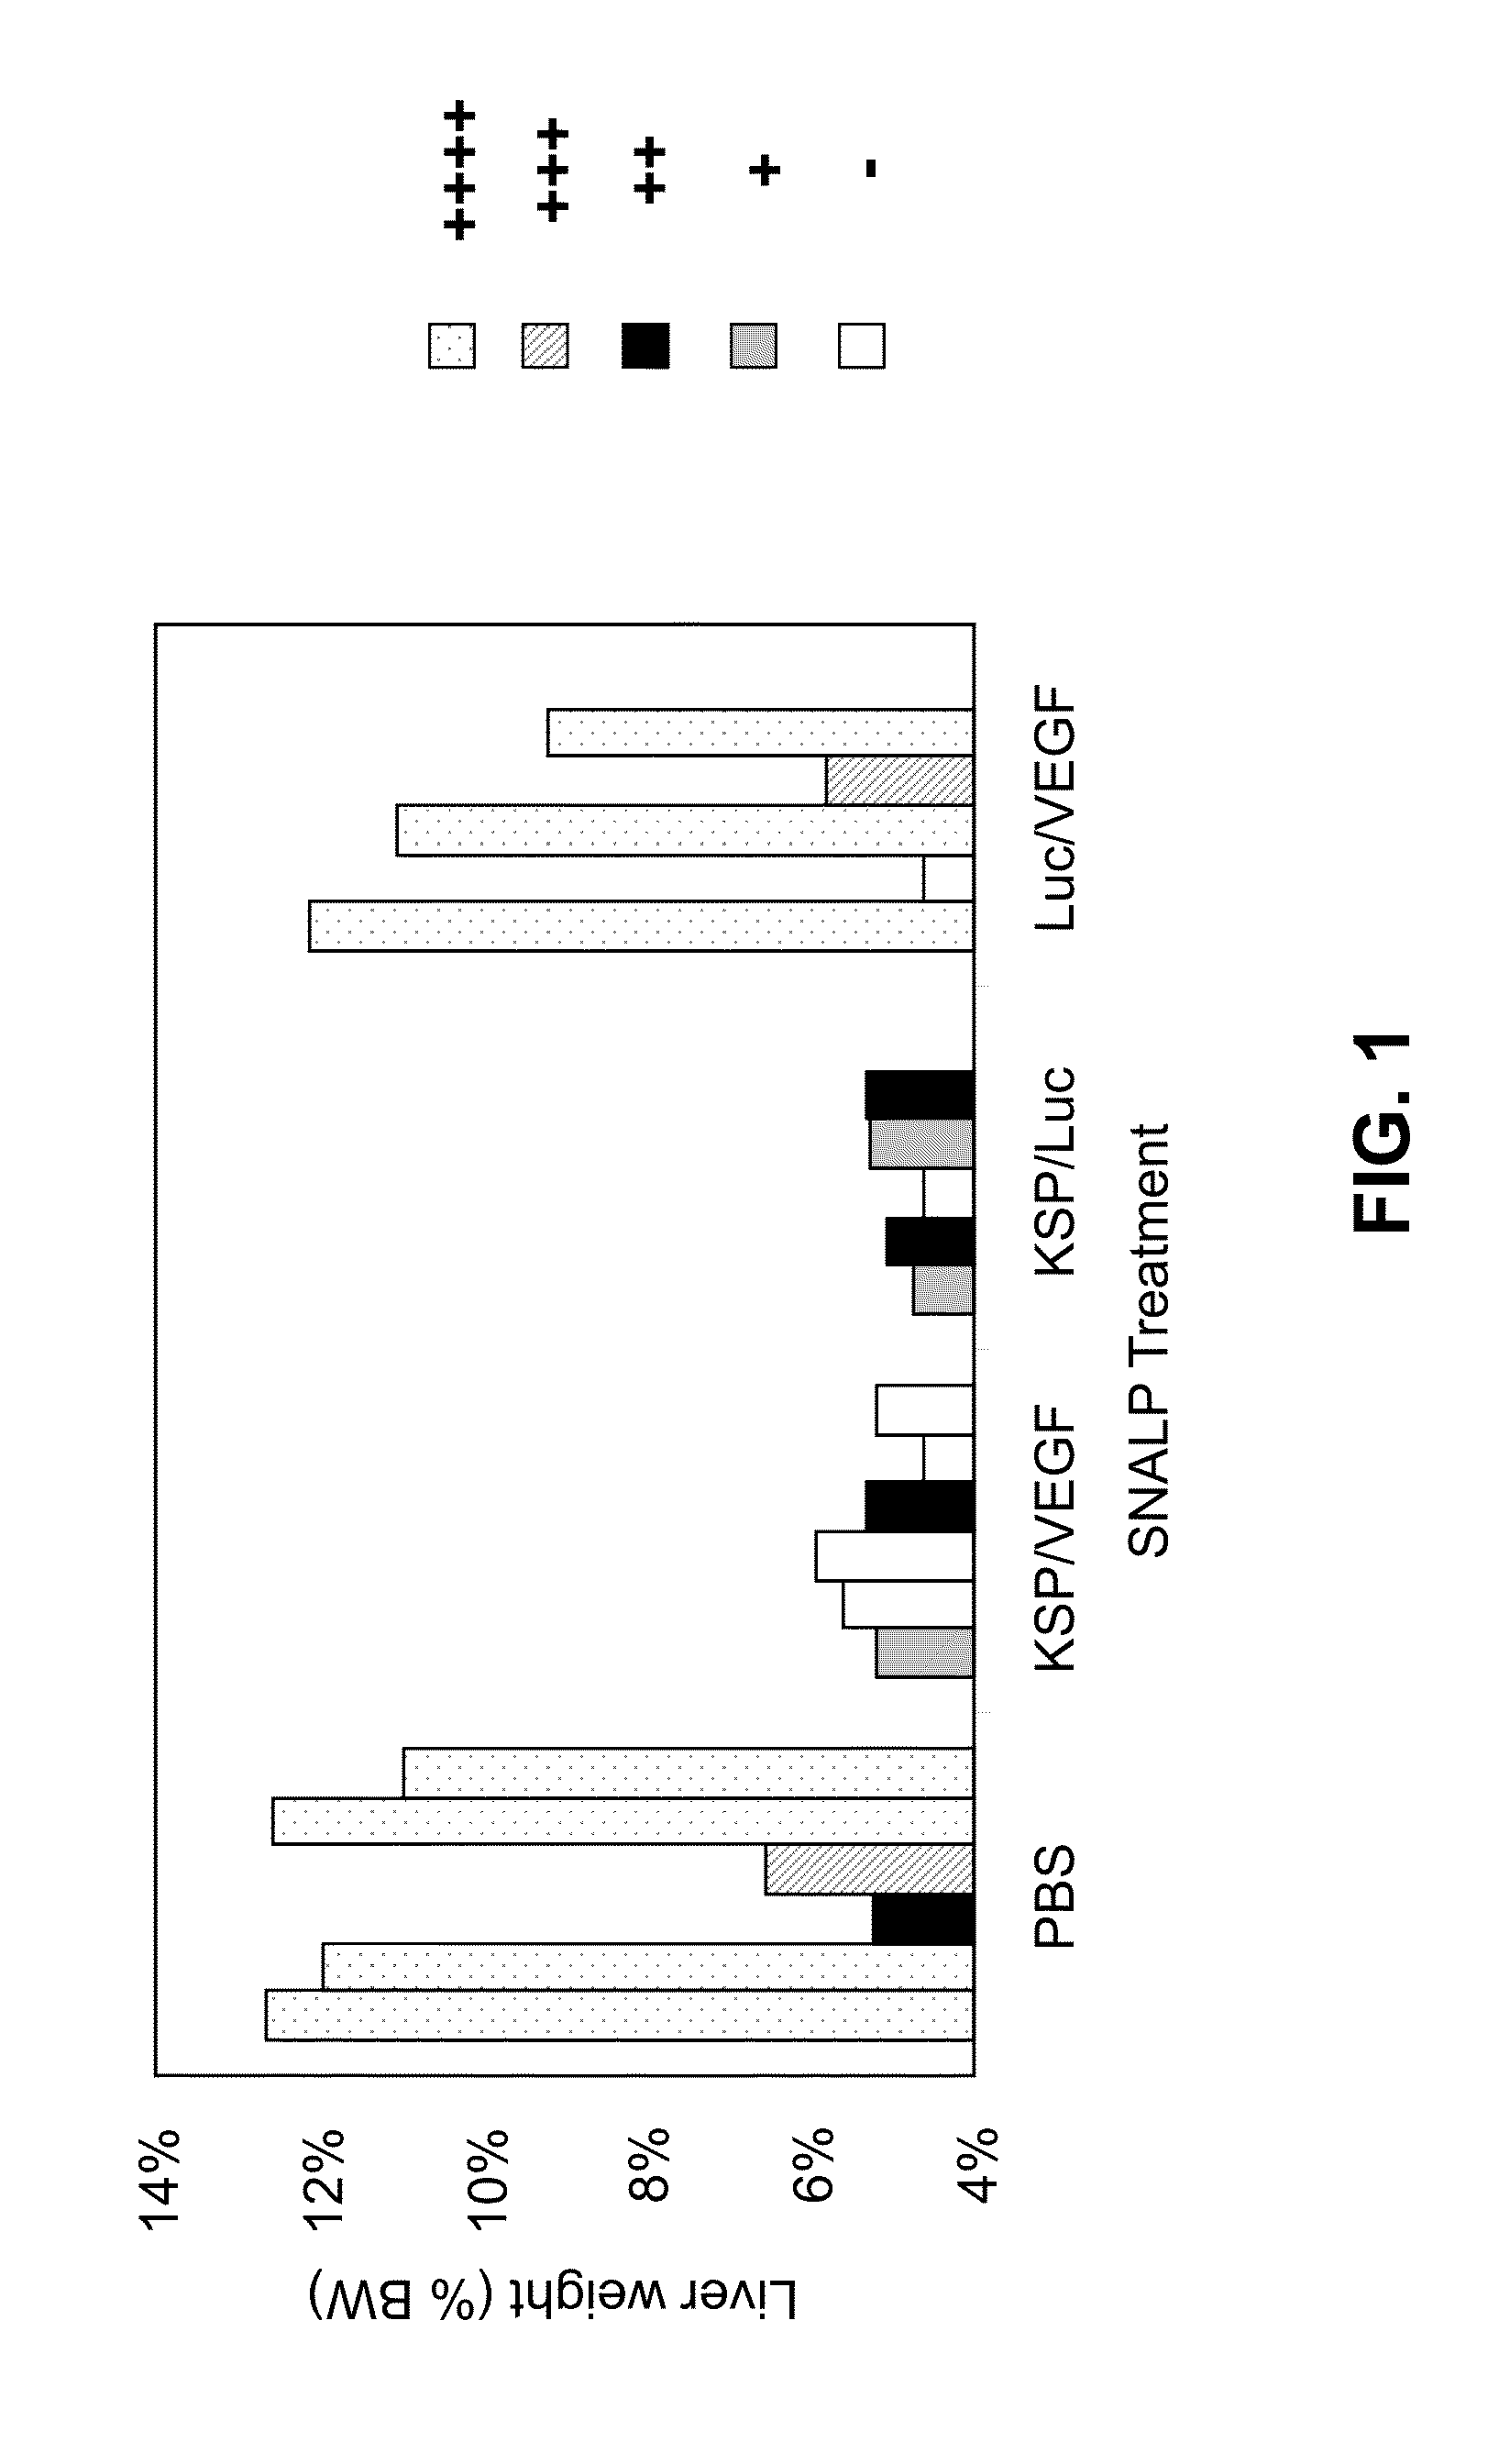 Lipid Formulated Compositions and Methods for Inhibiting Expression of Eg5 And VEGF Genes